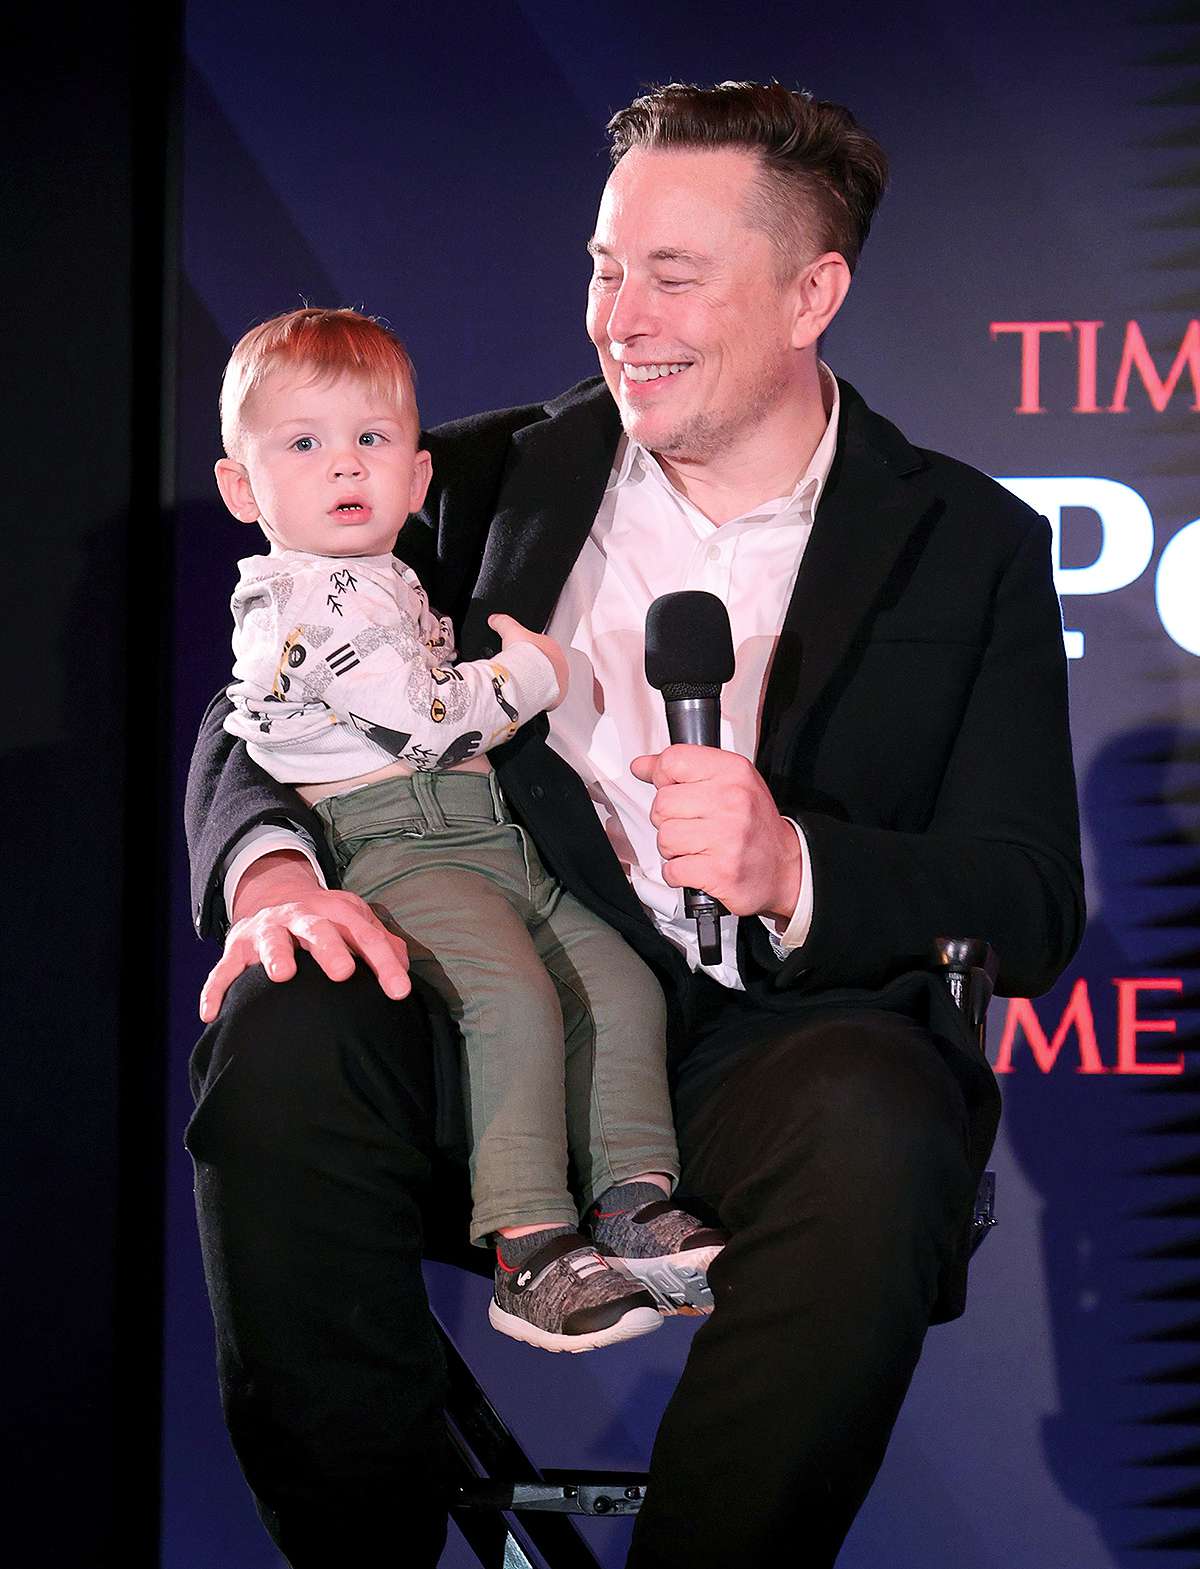 Elon Musk Brings Son X AE A-Xii to Person of the Year Event: Photos | PEOPLE .com